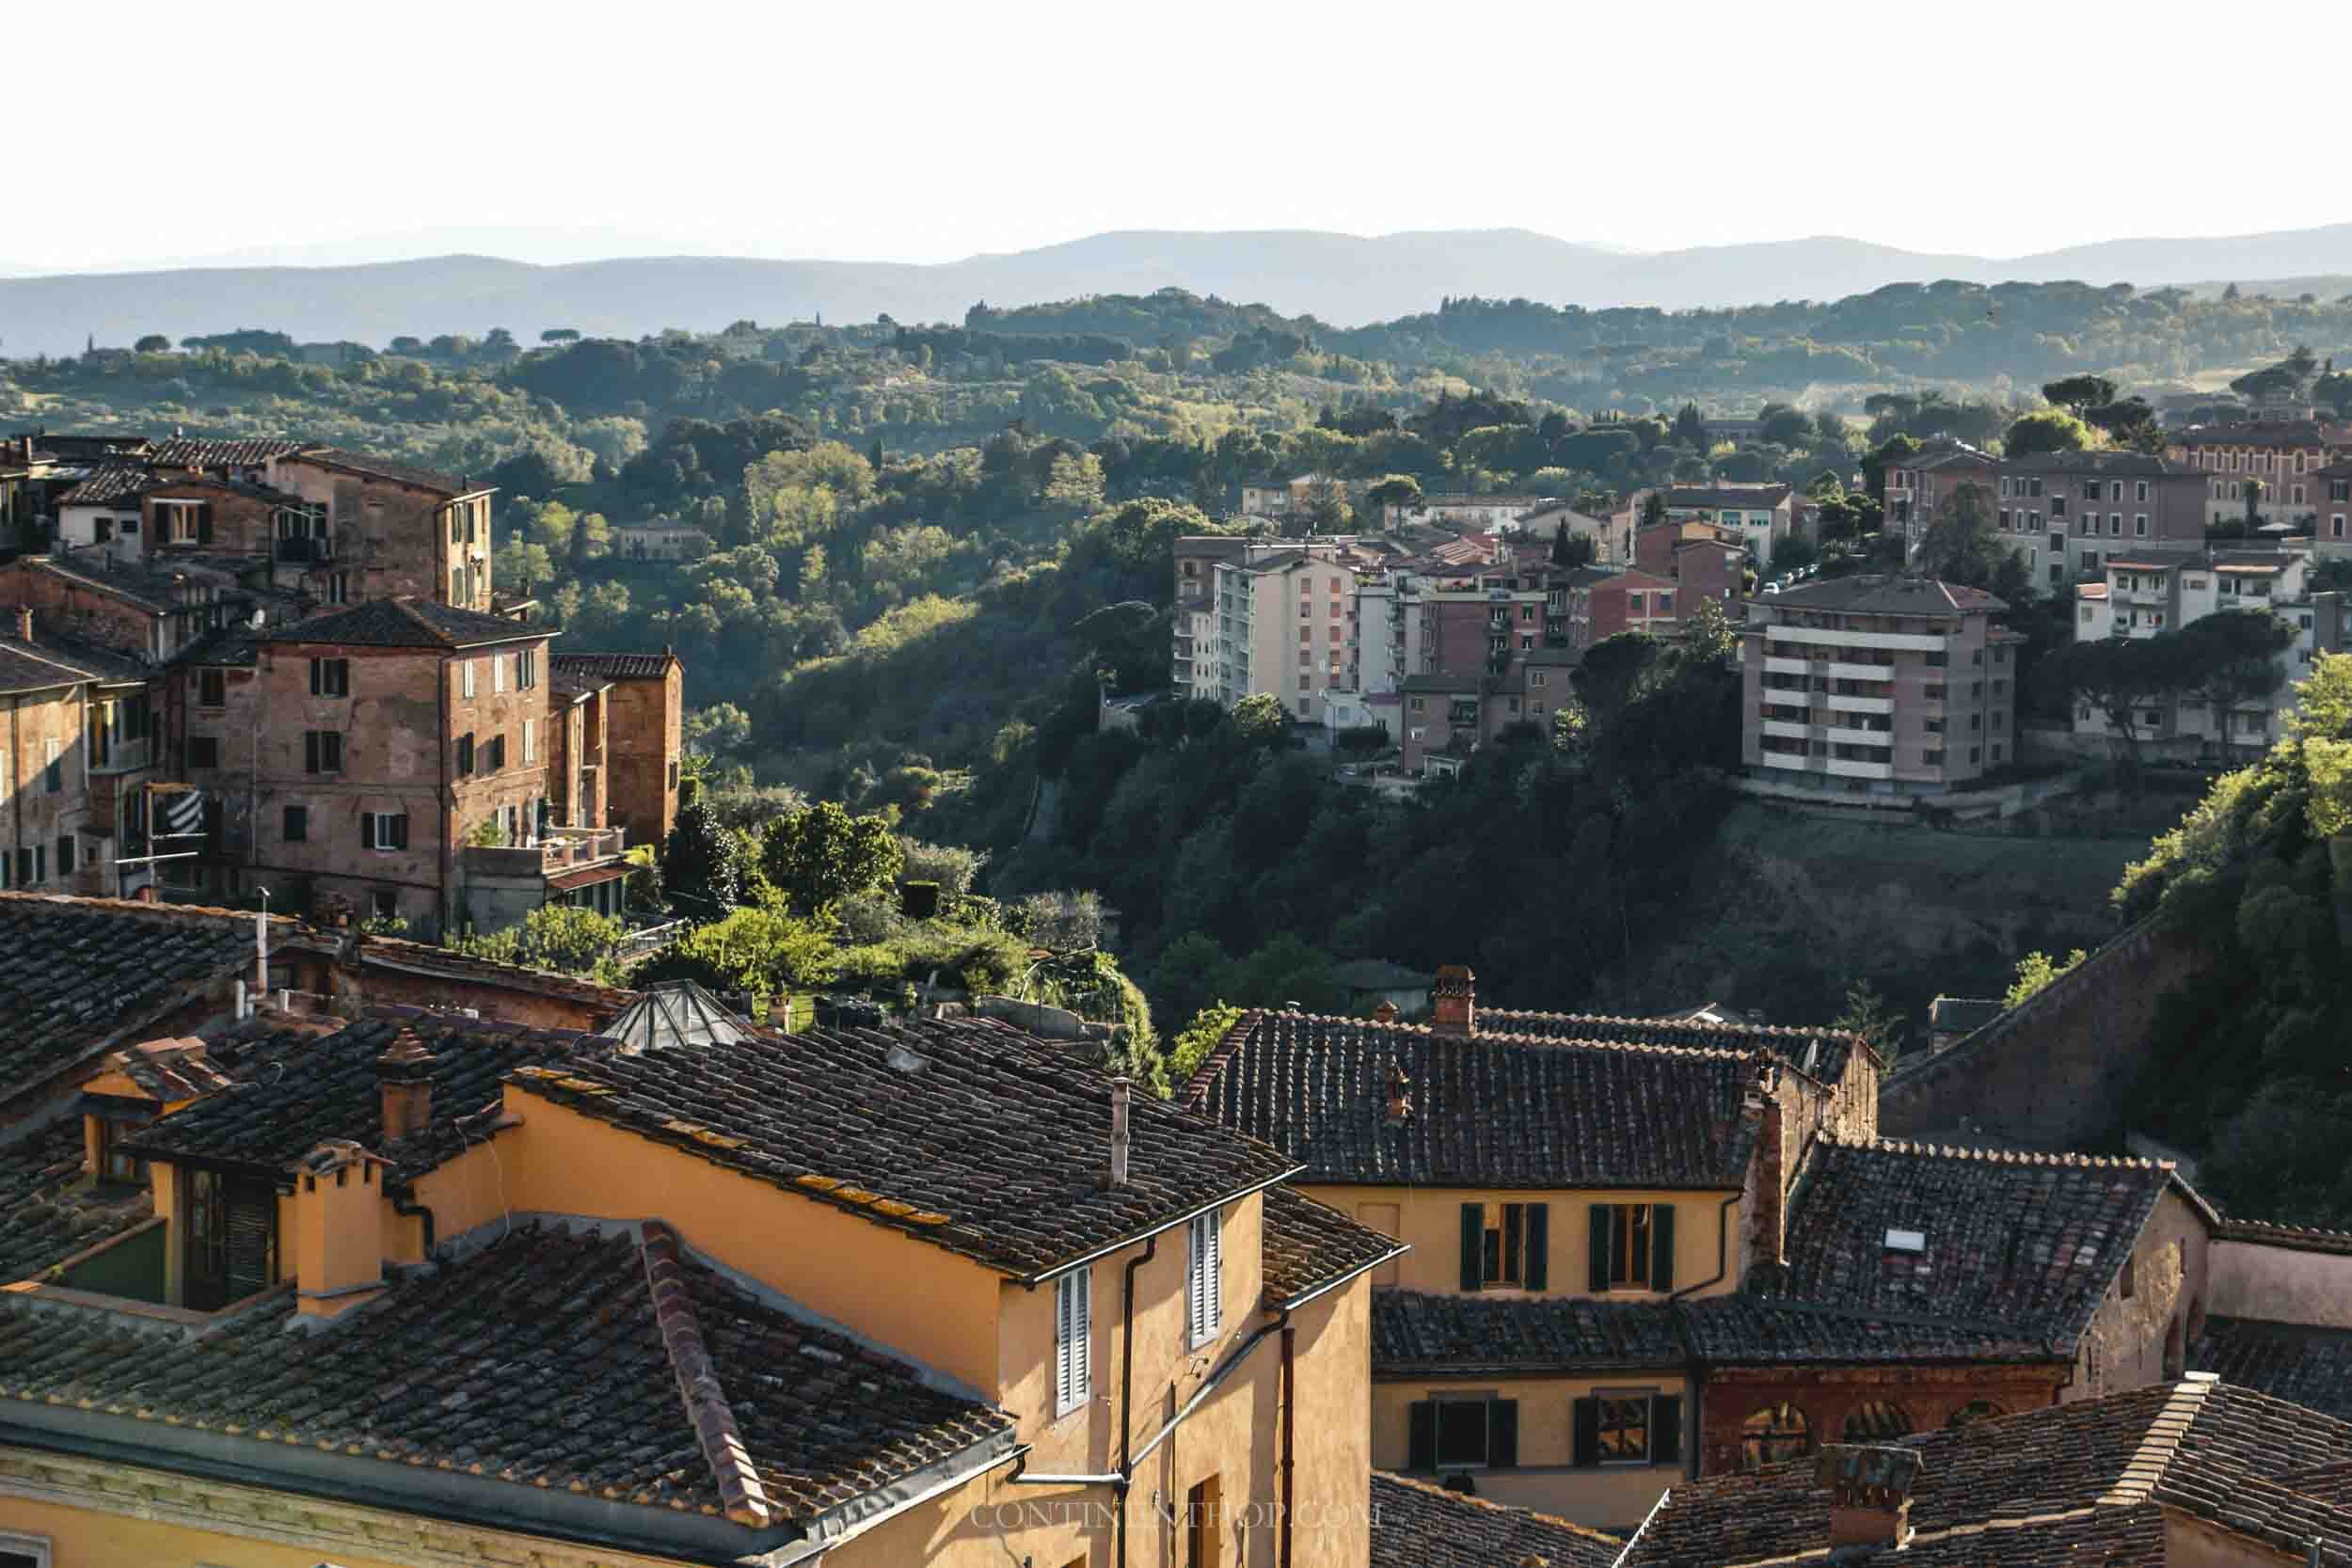 View of the rooftops and mountains in Siena Tuscany Italy